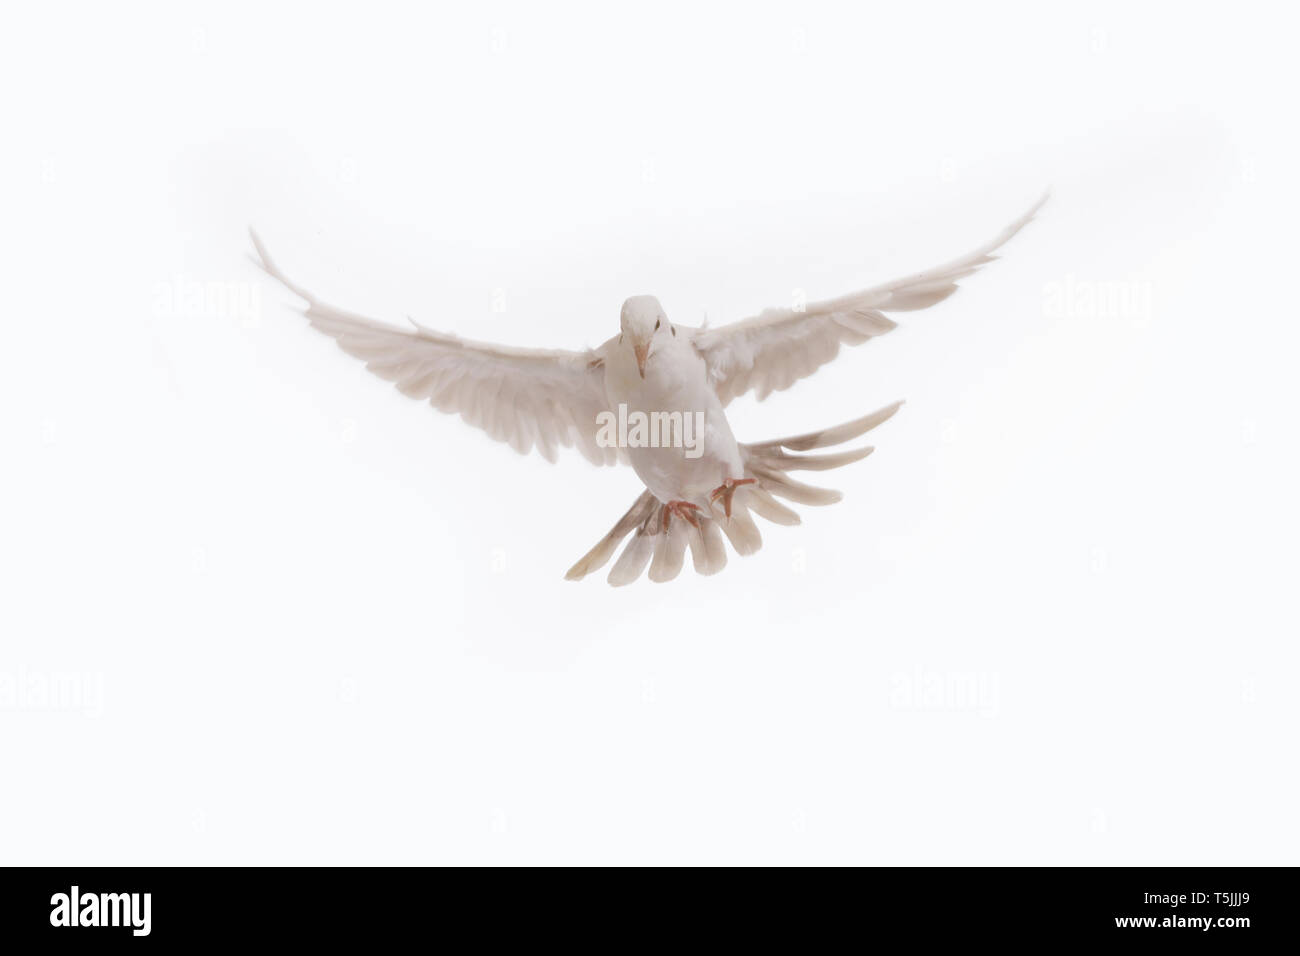 A free flying white dove isolated on a black background. Bird of peace. Pigeon mail Stock Photo